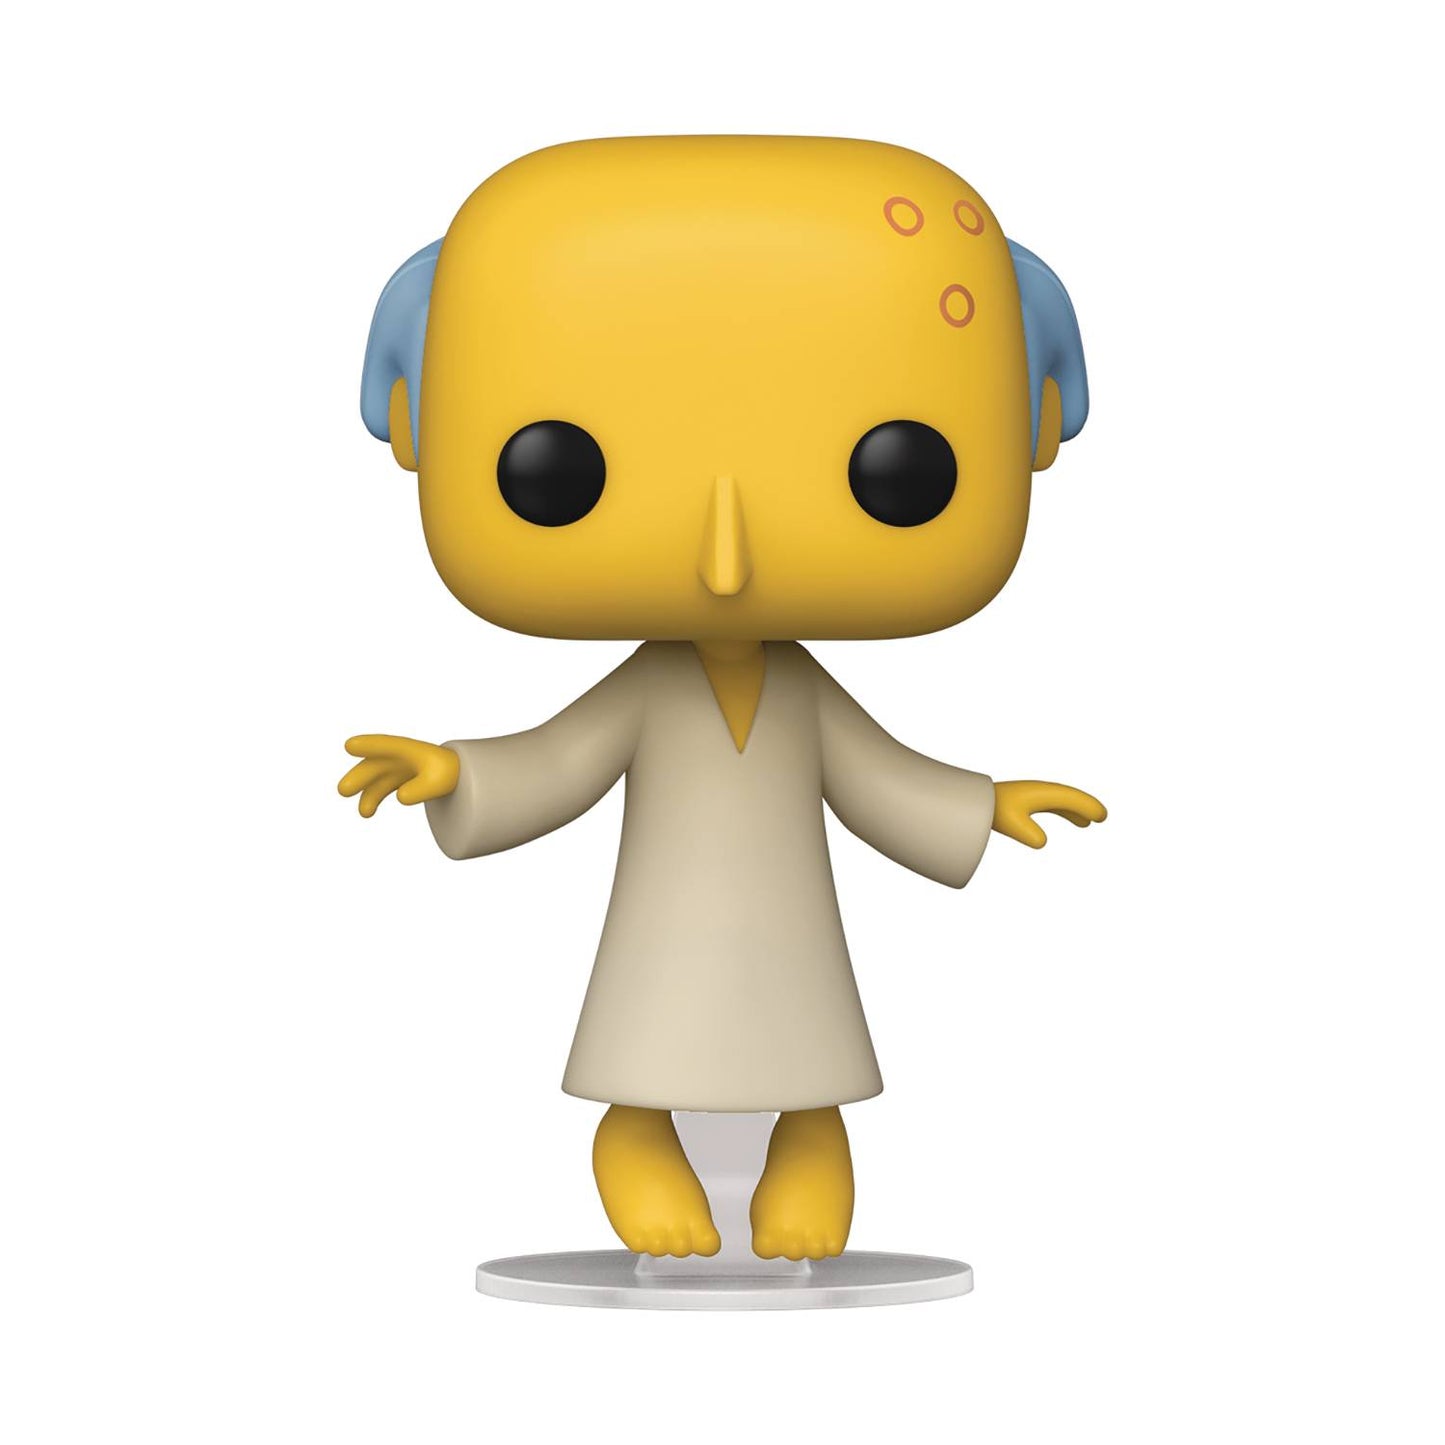 Funko - The Simpsons - Glowing Mr. Burns PX Exclusive